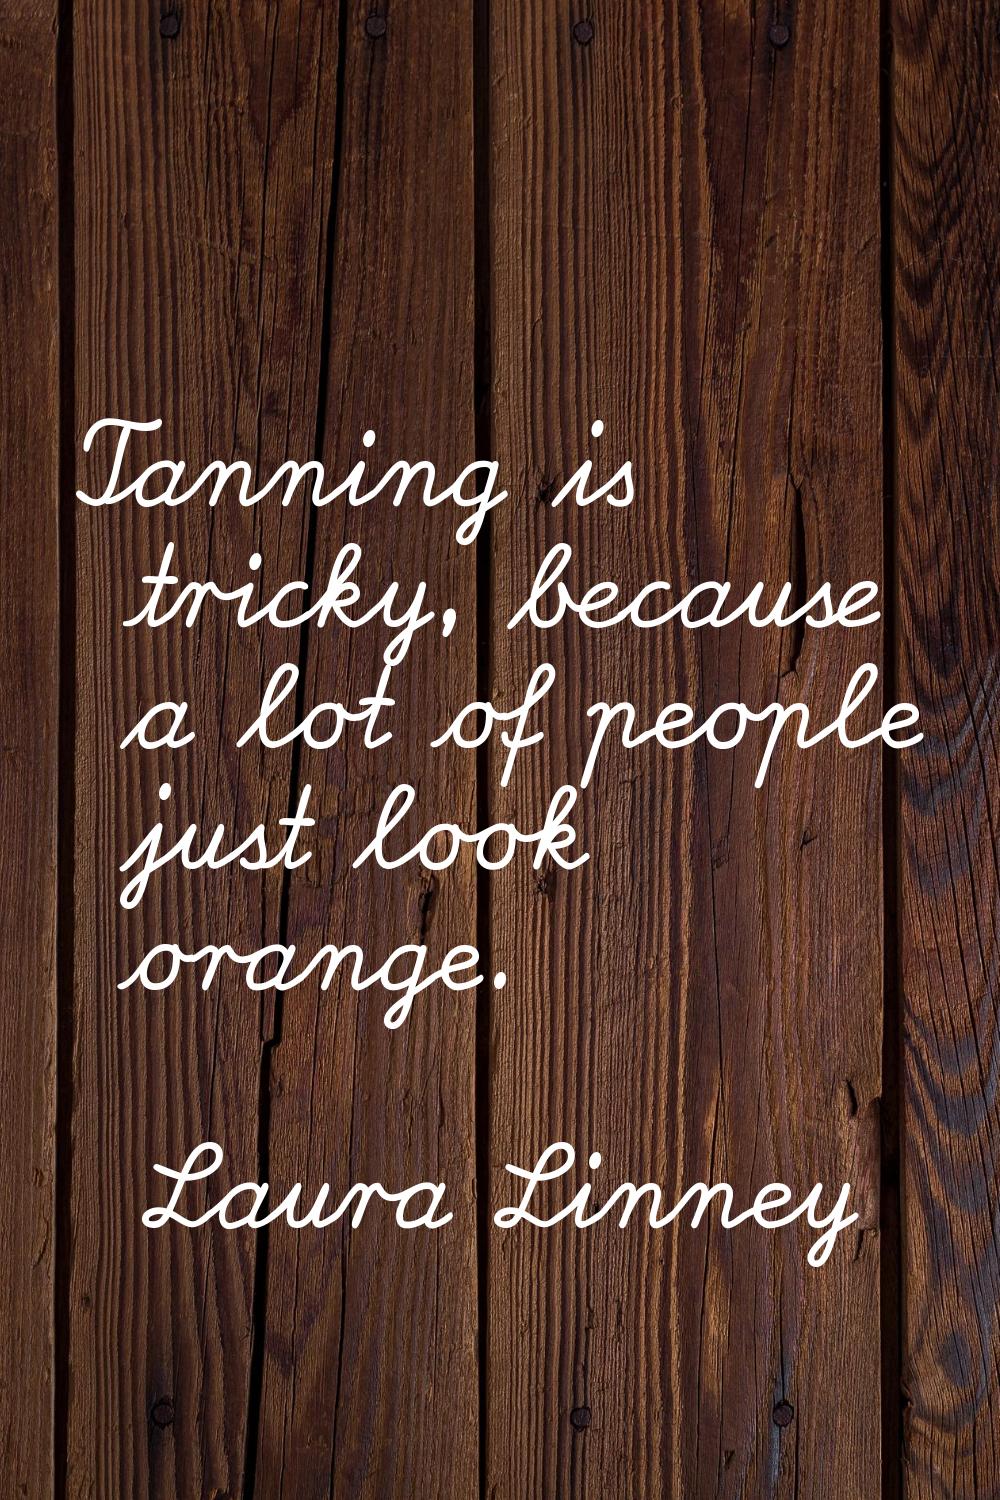 Tanning is tricky, because a lot of people just look orange.